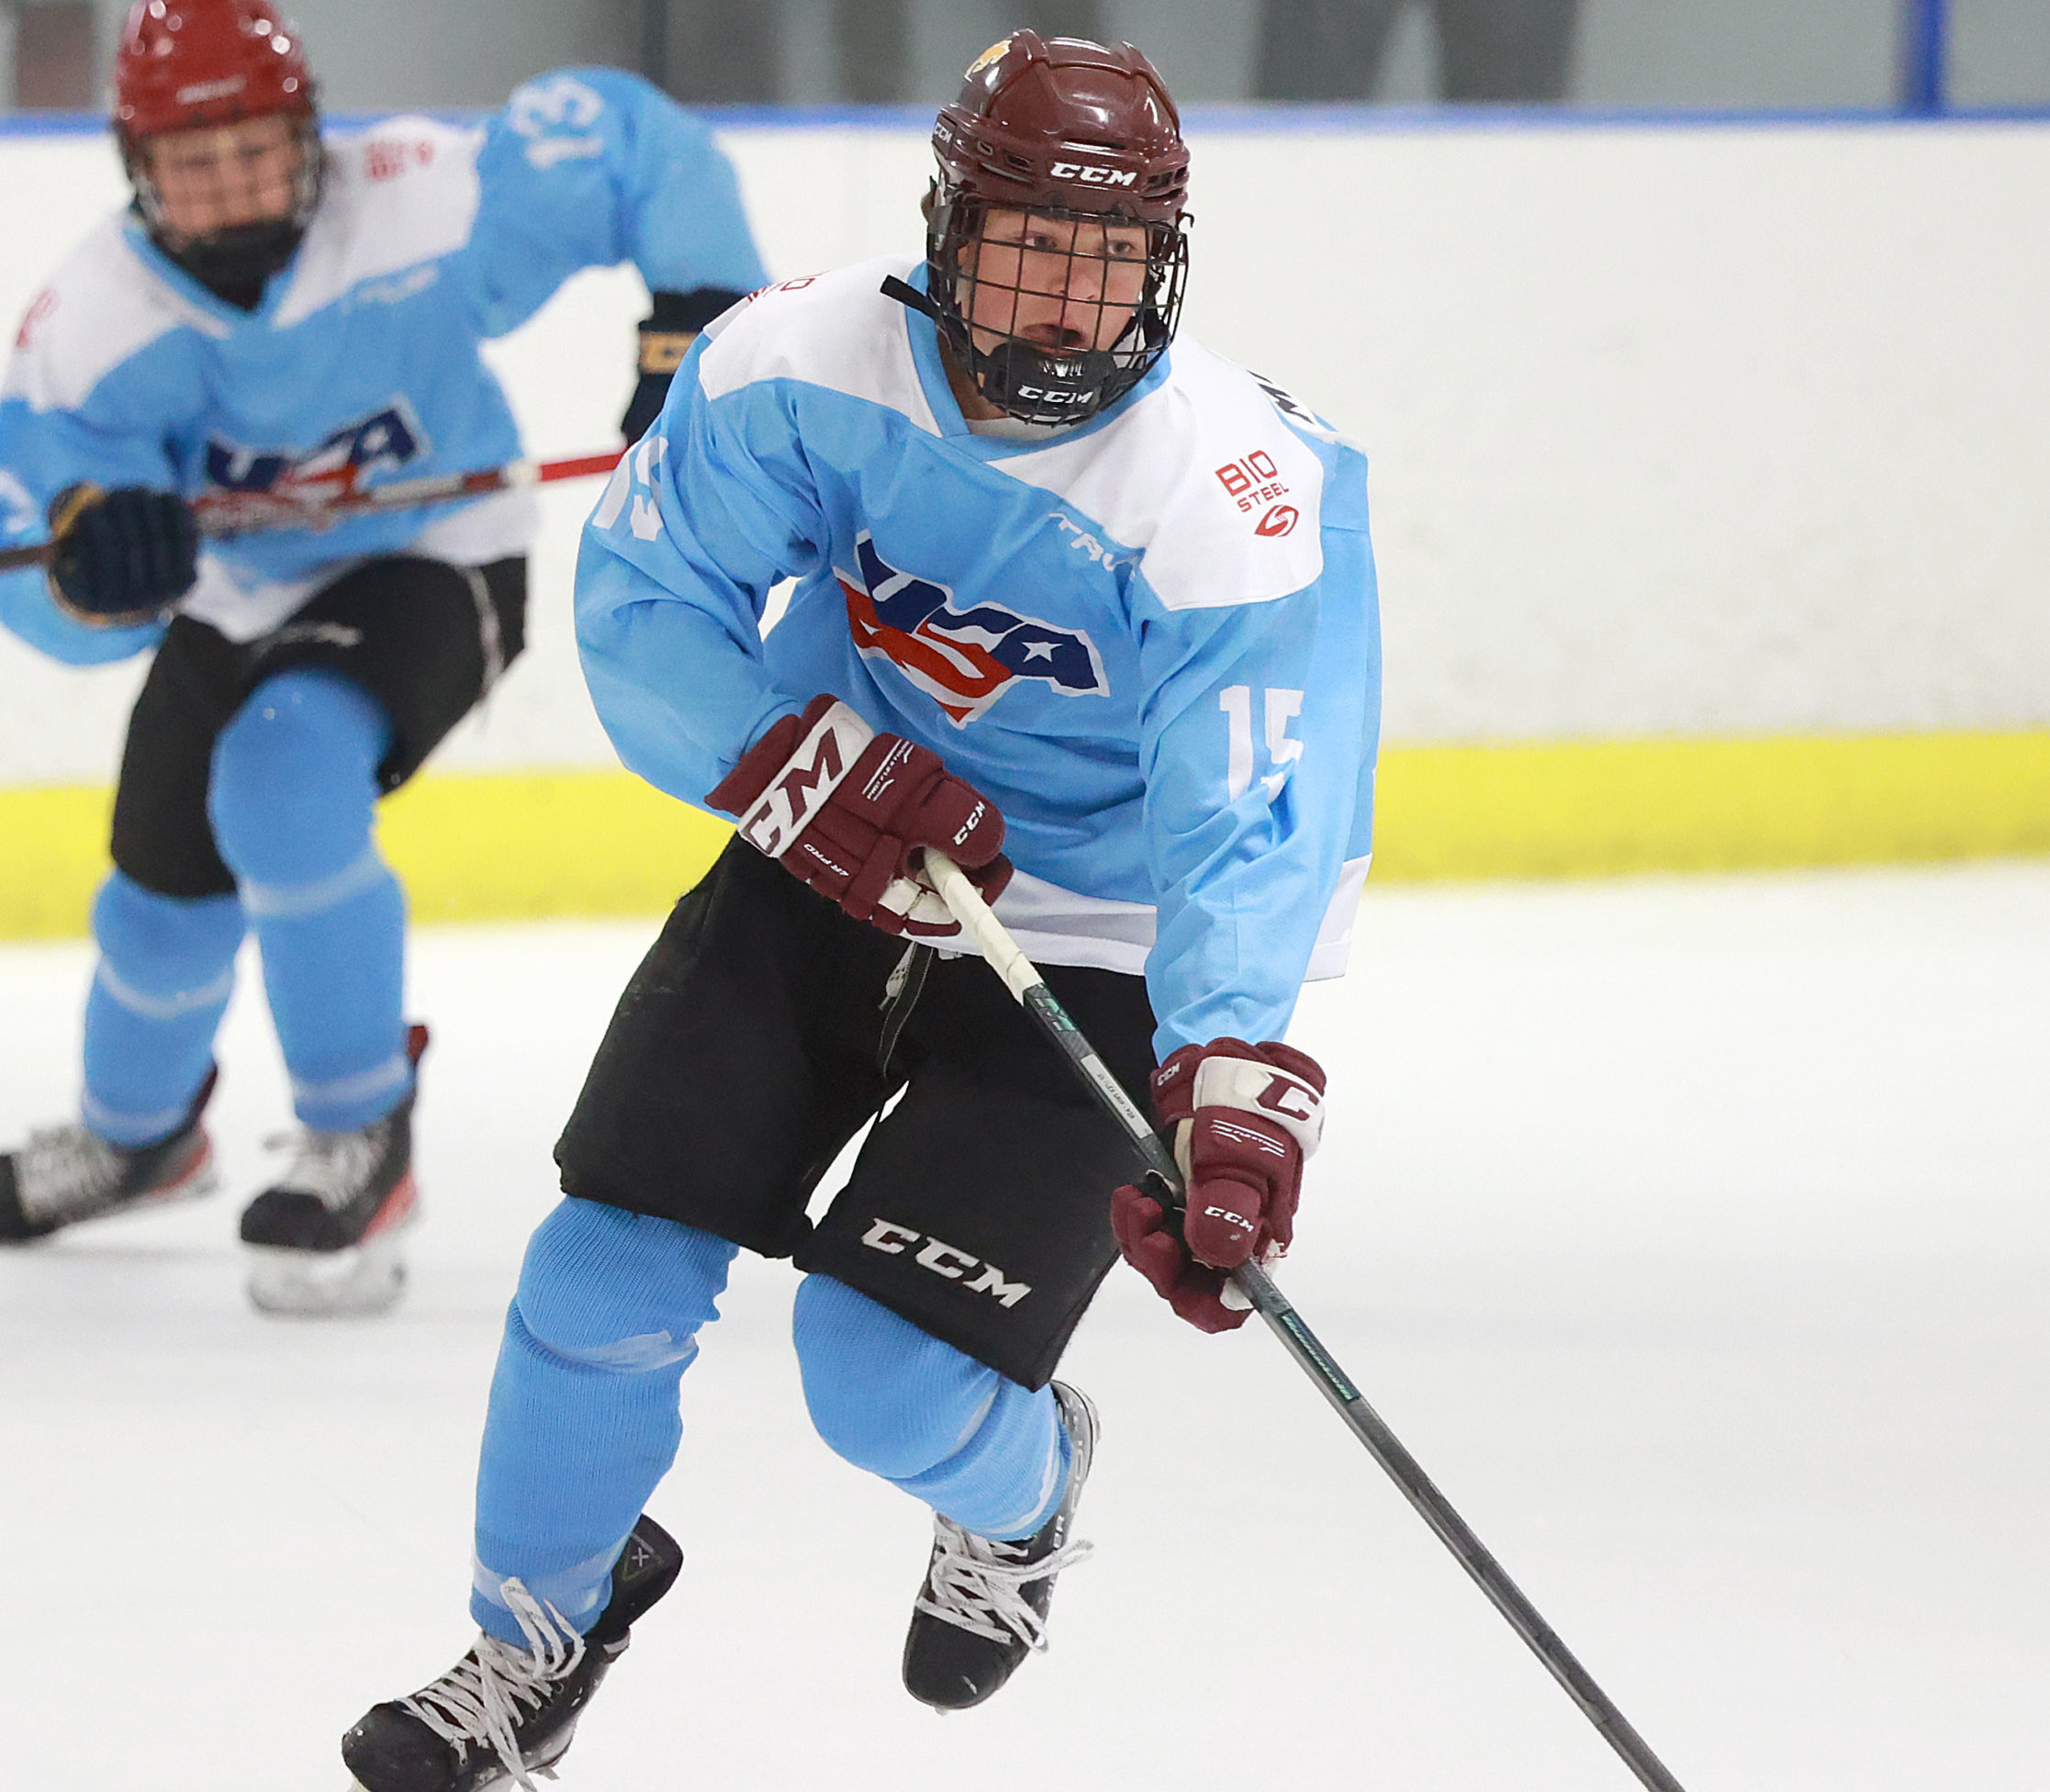 2022 USA Hockey Select 15 PDC Game Report Columbia Blue vs Forest